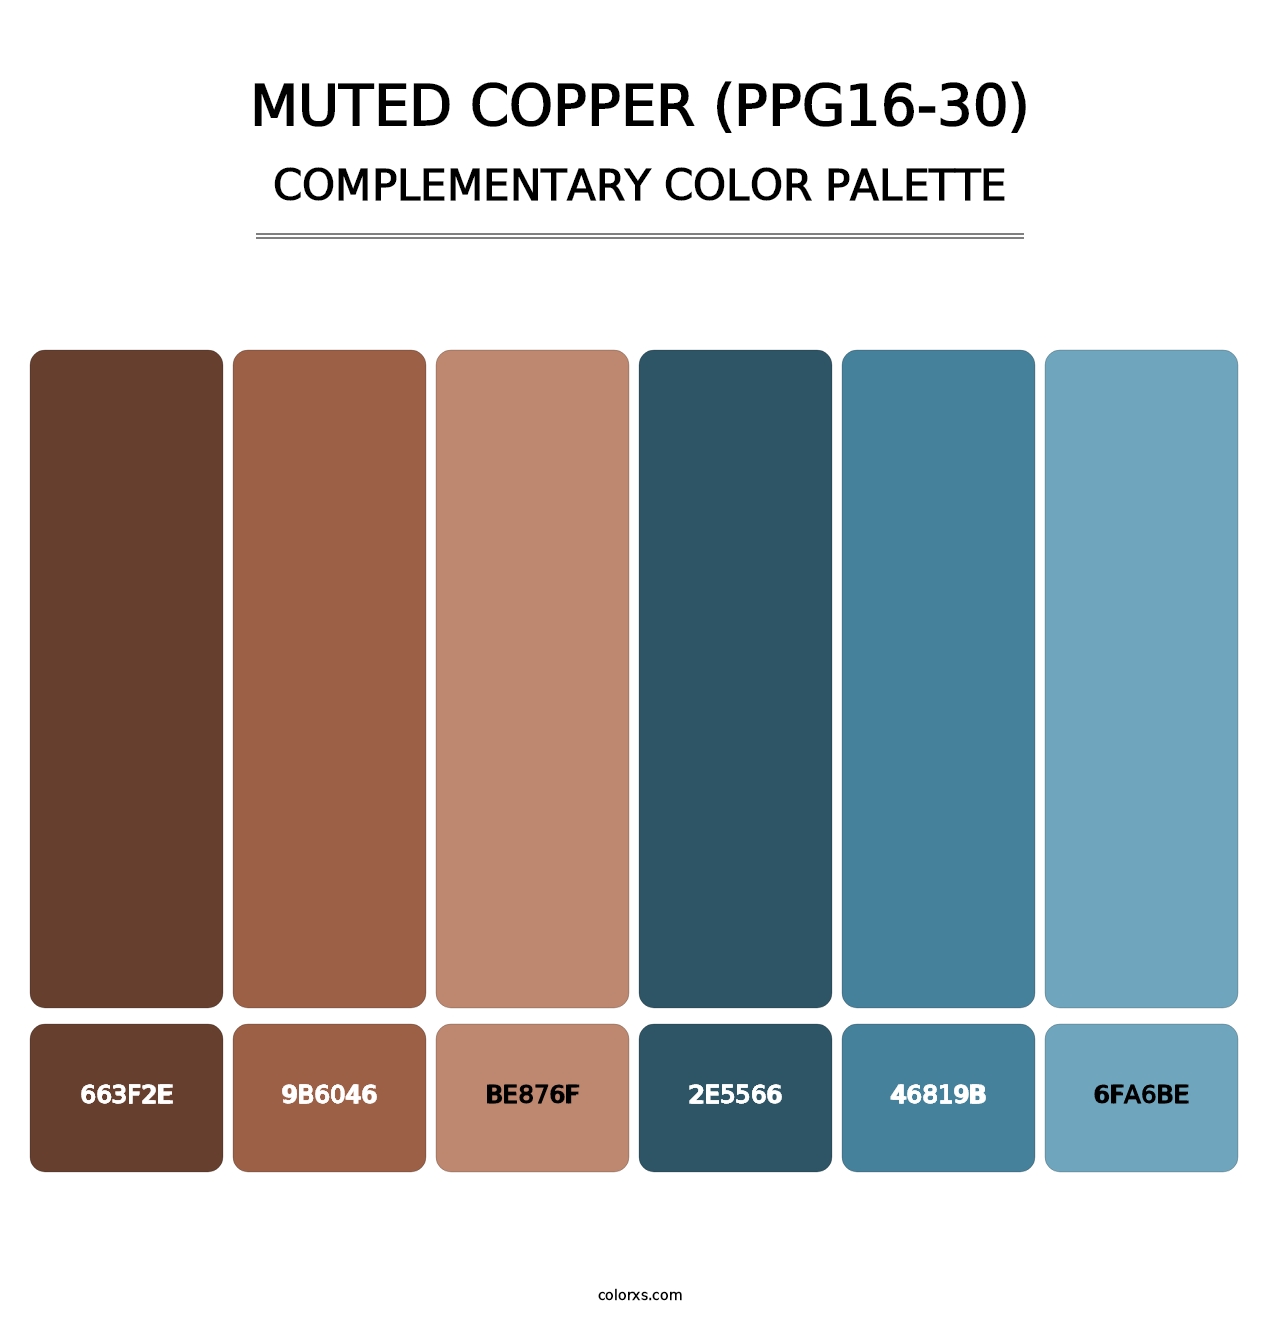 Muted Copper (PPG16-30) - Complementary Color Palette